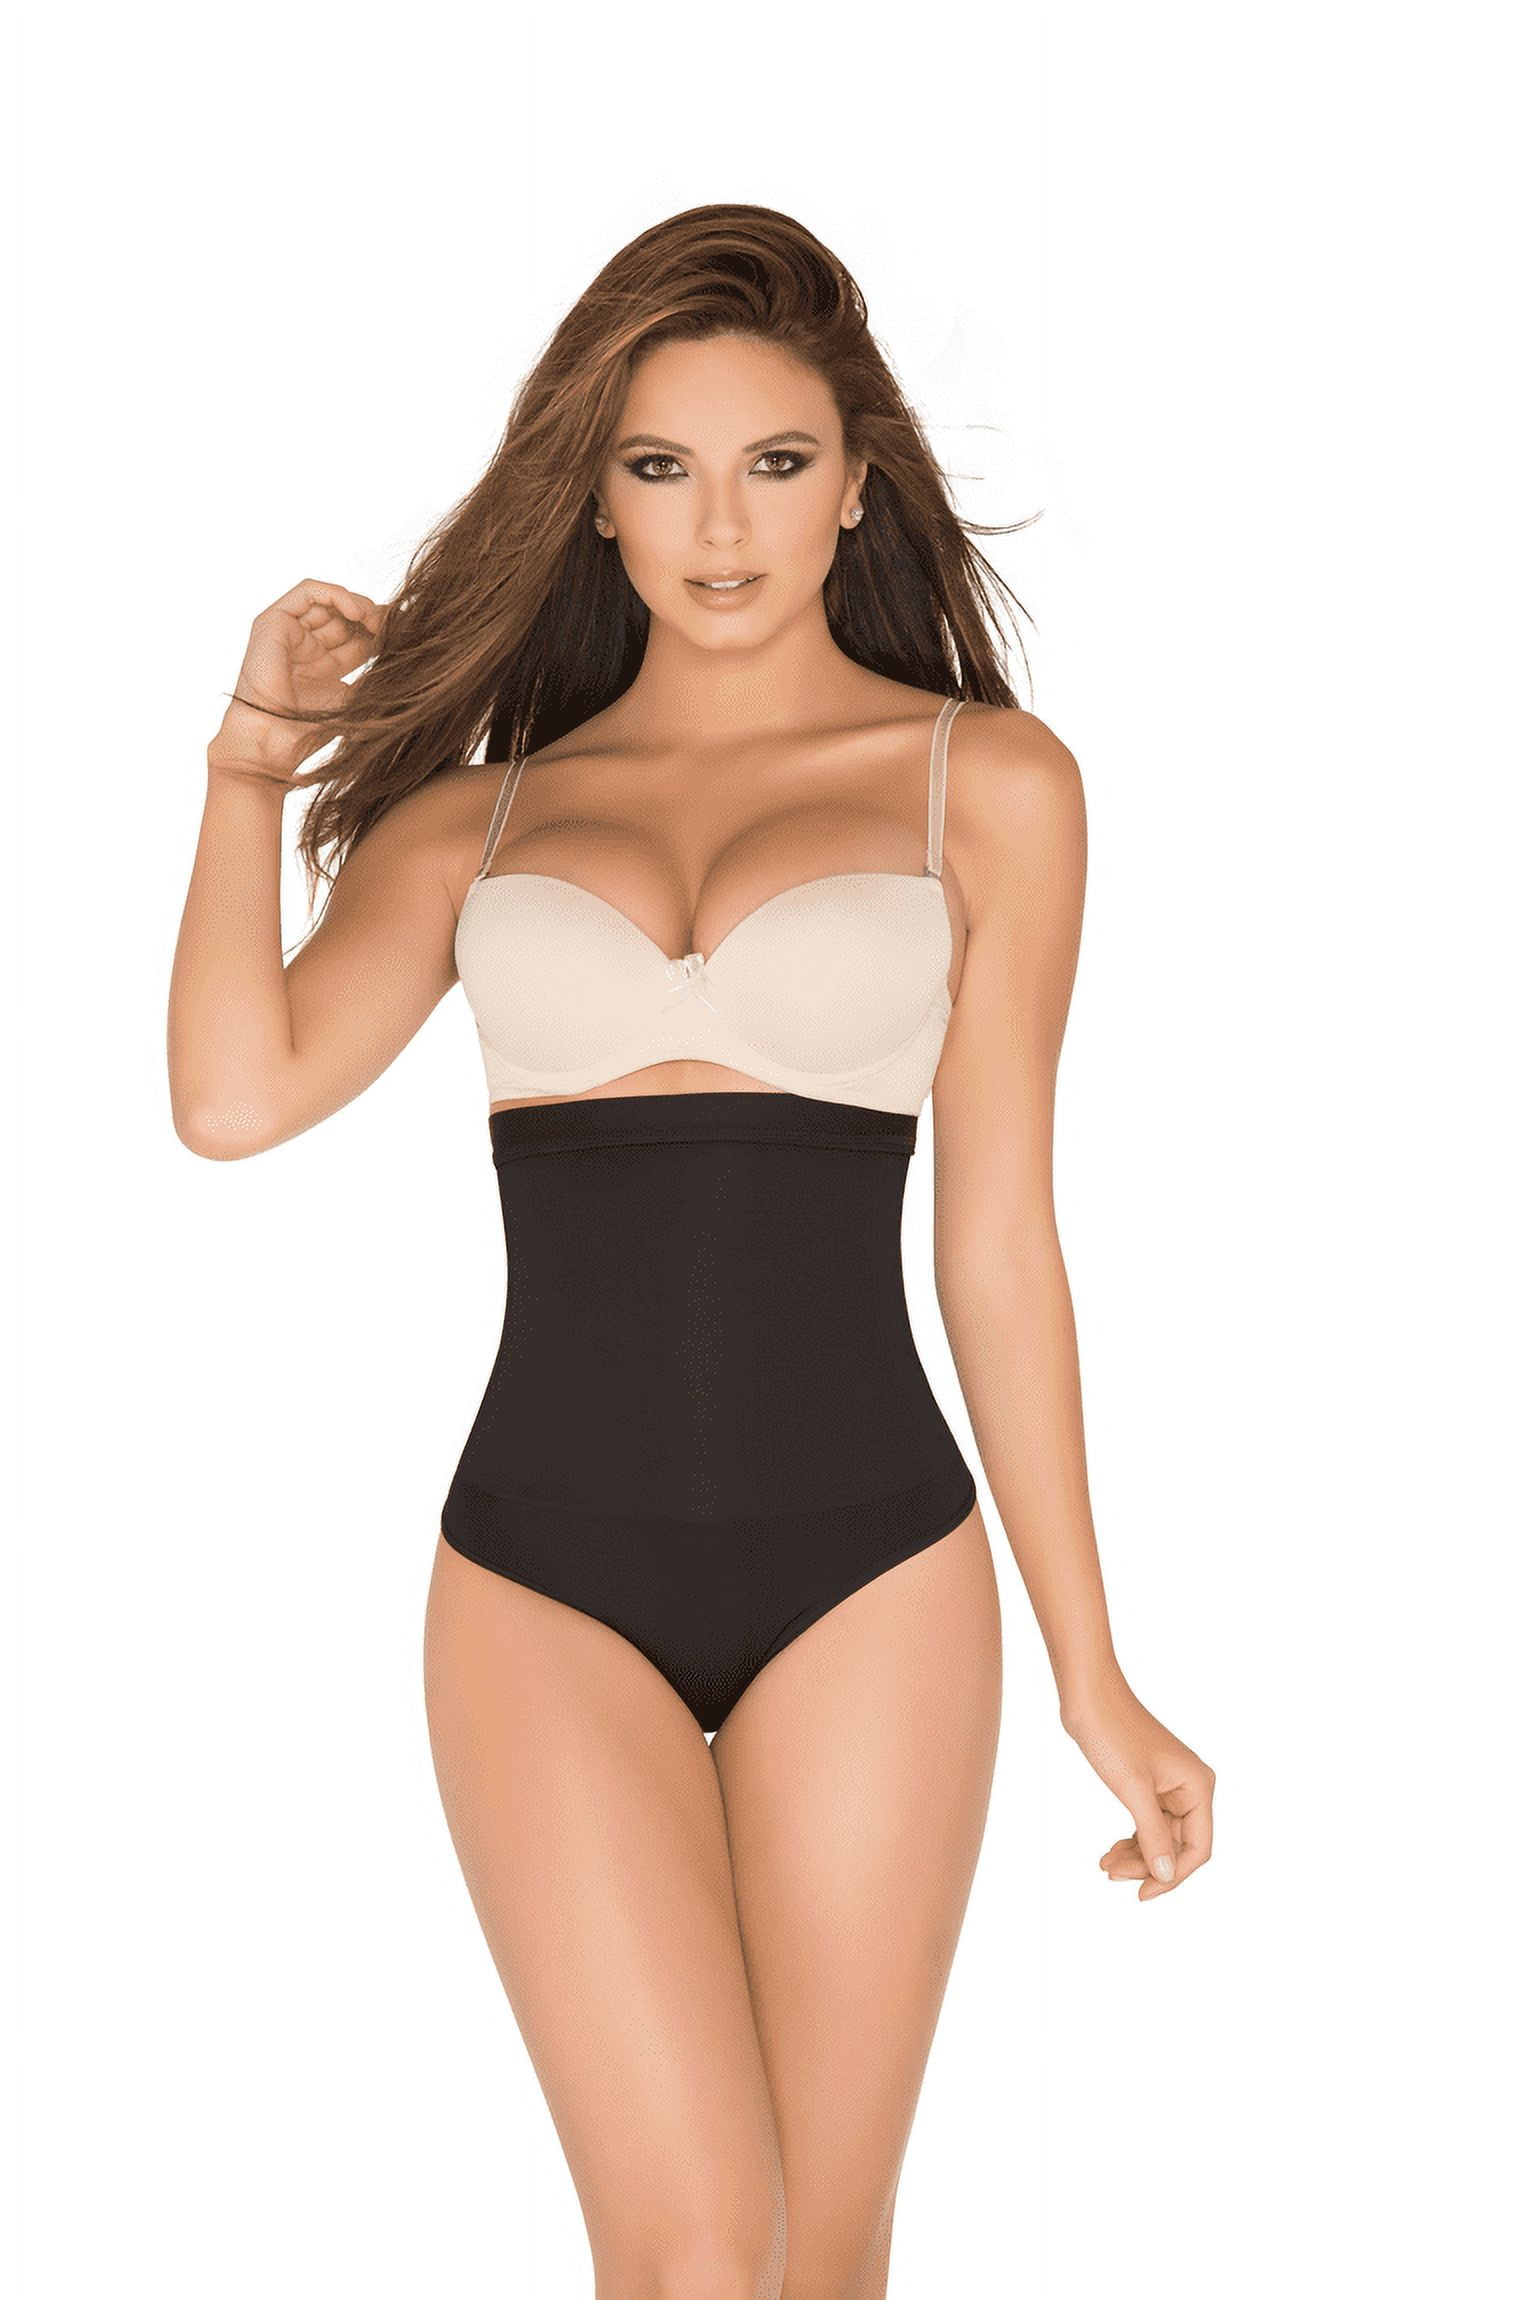 Silene fajas. Strapless short girdle. Assorted colors. Fajas colombianas